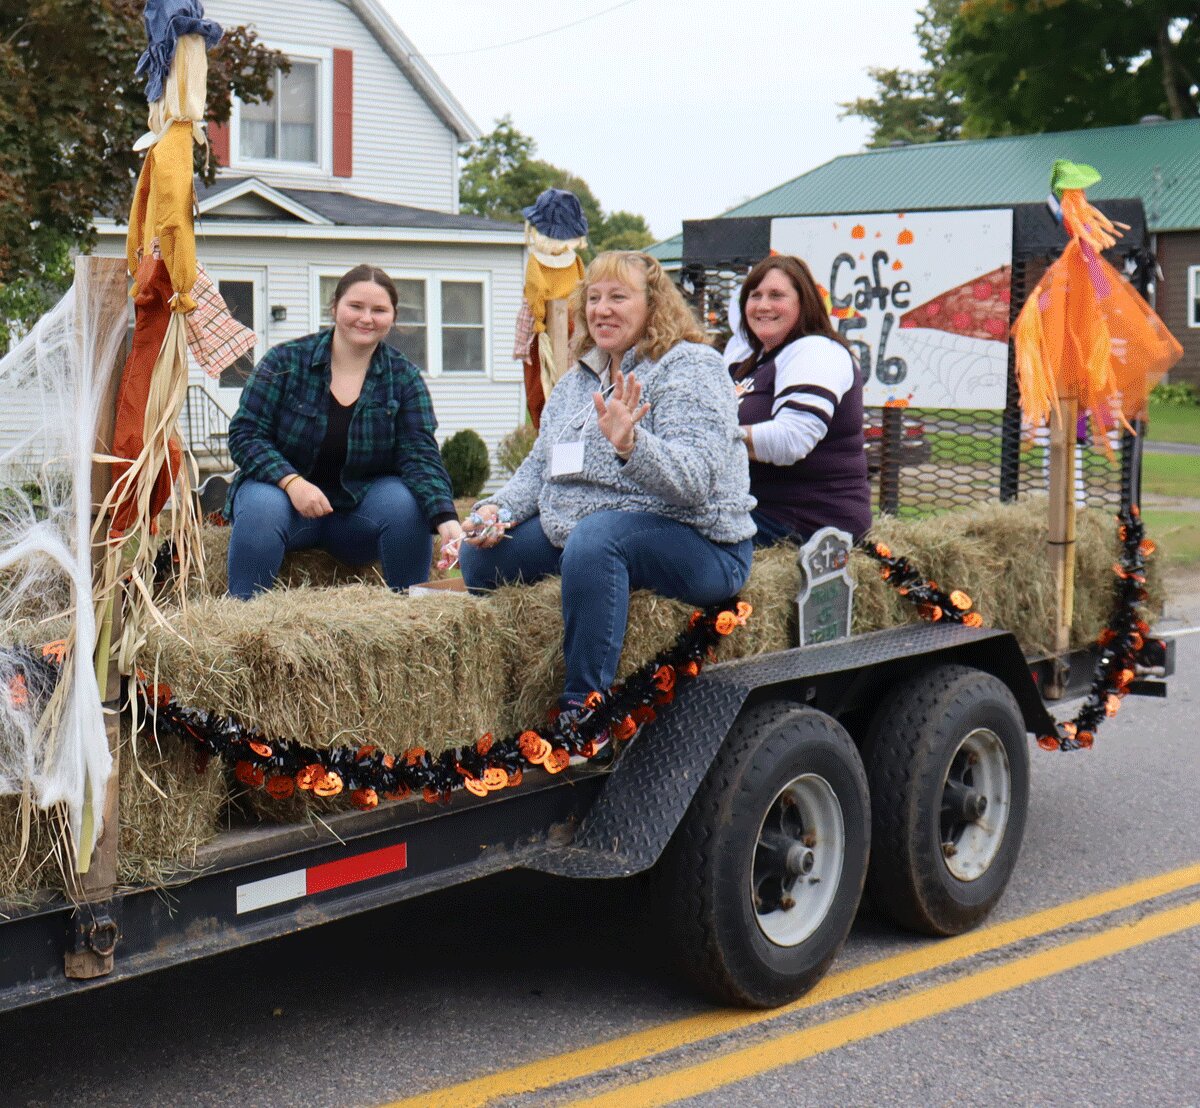 [img_assist|nid=327691|title=The Norwood-Norfolk Central School Trap Team had a float in the Norfolk Fall Festival parade on Main St. Saturday. From left are members Clint Crosbie, Matthew and Patrick Nolan, and assistant instructor Jason Coller.|desc=|link=none|align=middle|width=878|height=900]